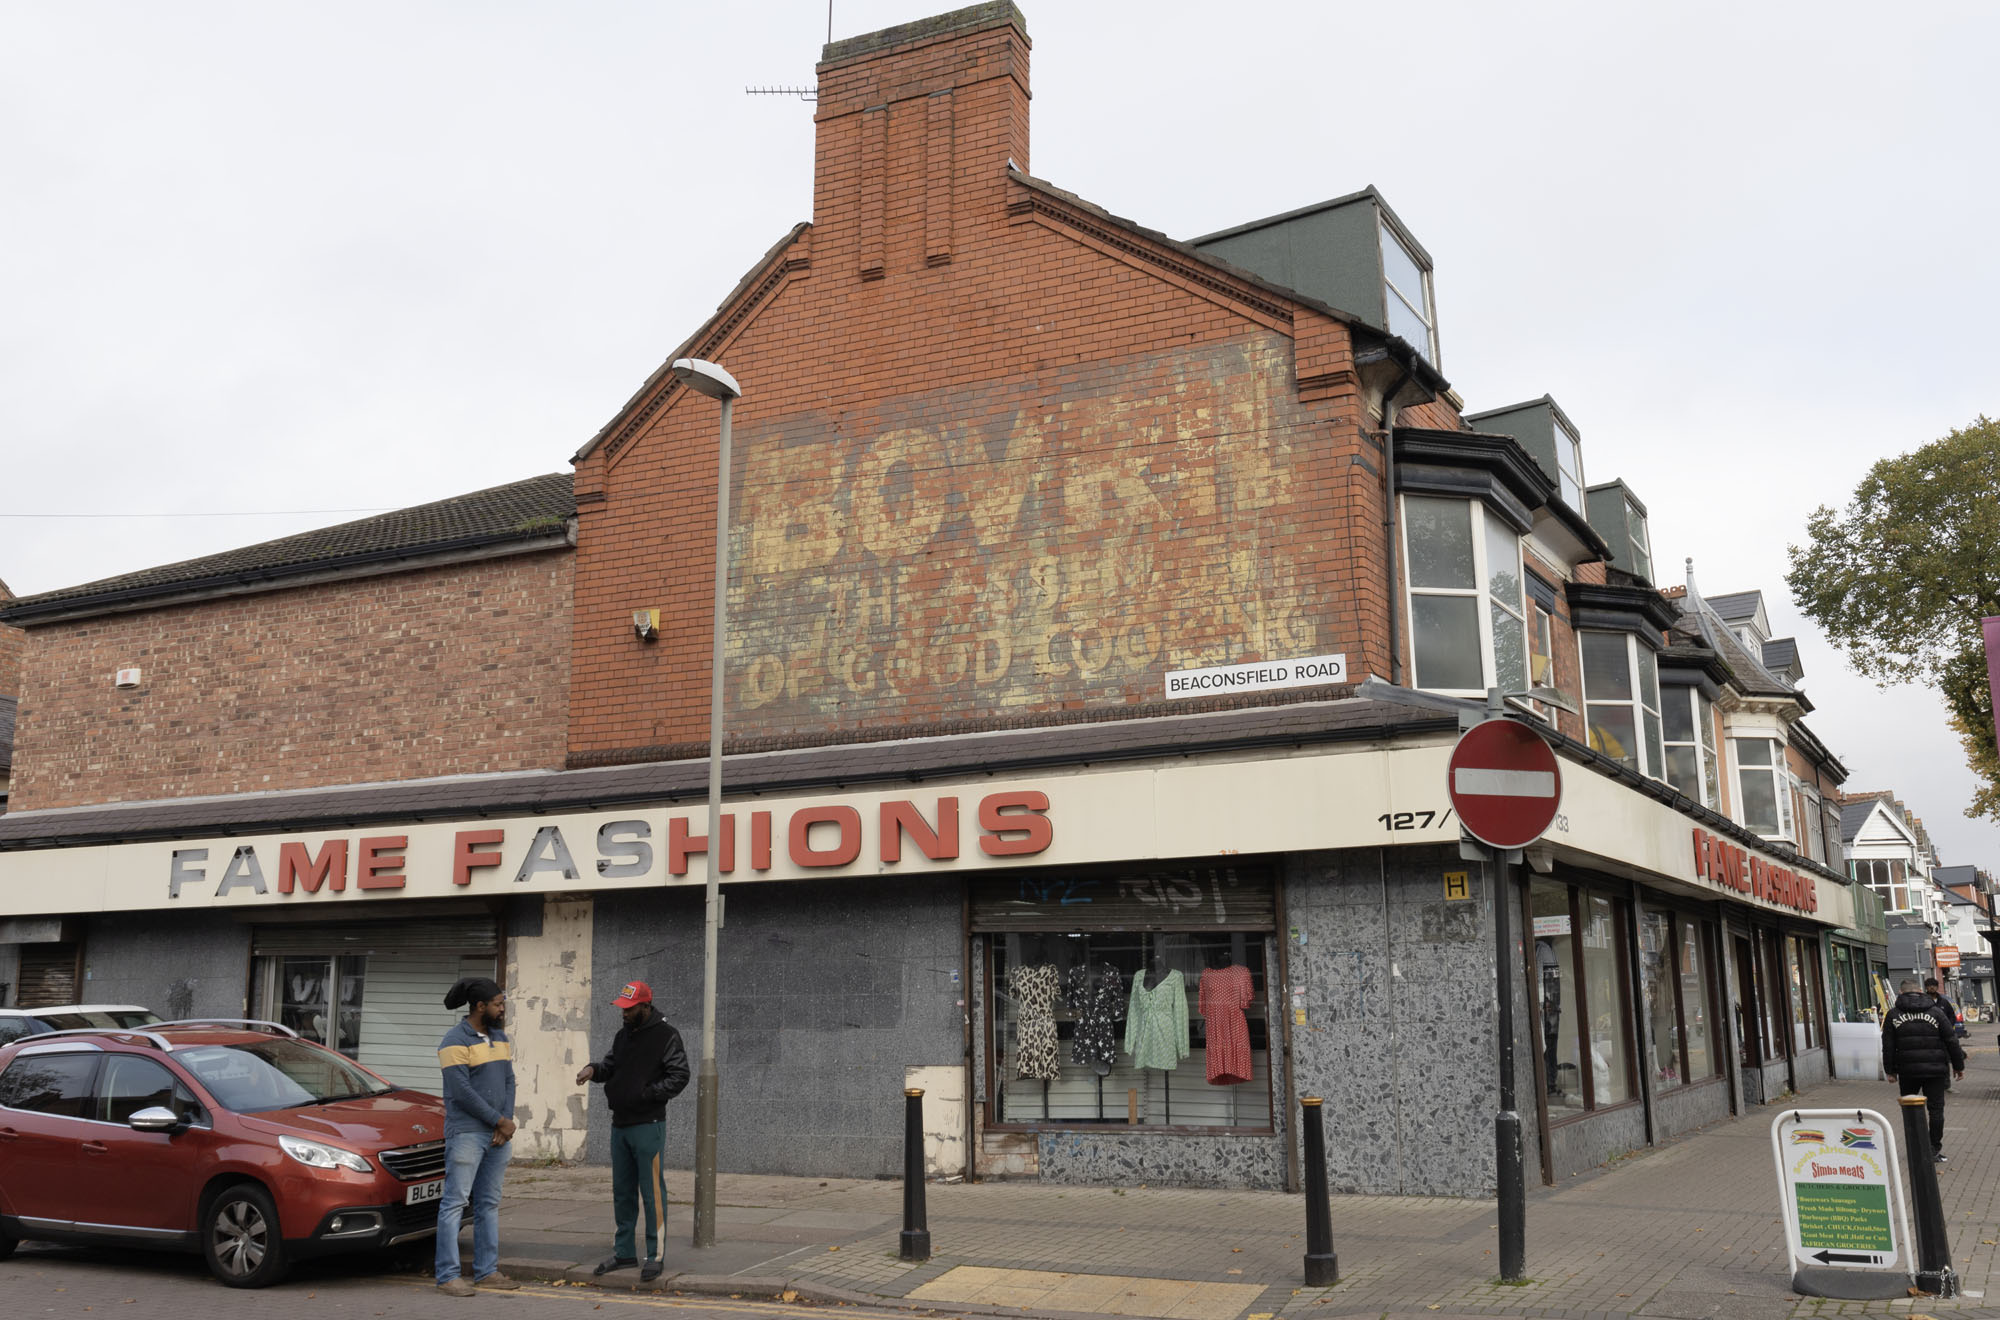 Ghost sign worded: 'Bovril - The Essence of Good Cooking' on the first floor of a building with another sign for current business 'Fame Fashions' beneath on the ground floor.